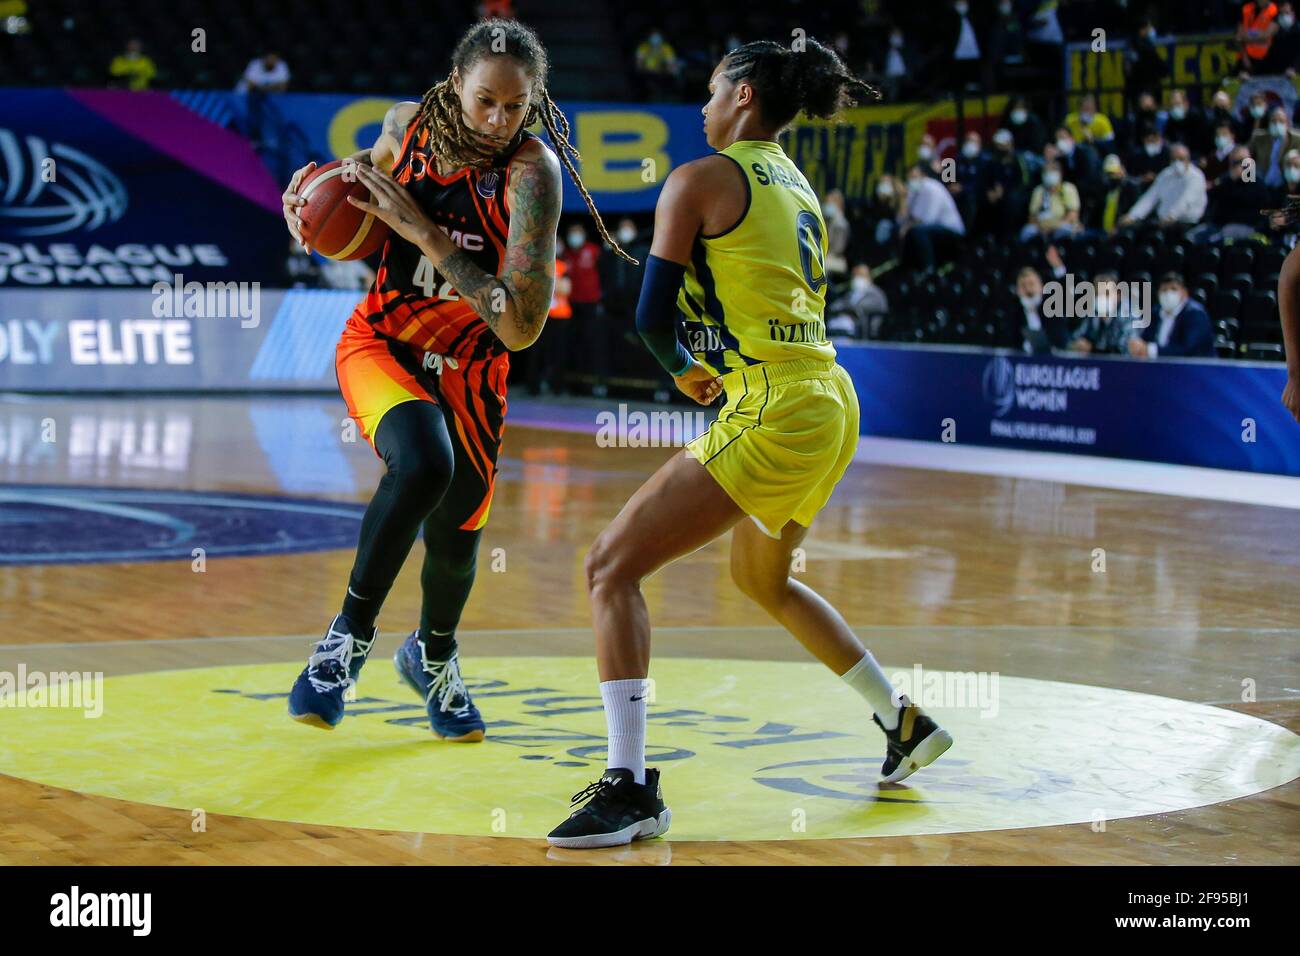 ISTANBUL, Turkey. 16th Apr, 2021: Basketbal: Fenerbahce Oznur Kablo v UMMC Ekaterinburg: Istanboel ISTANBUL, Turkey. 16th Apr, 2021. APRIL 16: Brittney Griner of UMMC Ekaterinburg, Satou Sabally of Fenerbahce Oznur Kablo during the Euroleague Women Final Four match between Fenerbahce Oznur Kablo and UMMC Ekaterinburg at Volkswagen Arena on April 16, 2021 in Istanbul, Turkey (Photo by /Orange Pictures) Credit: Orange Pics BV/Alamy Live News Stock Photo